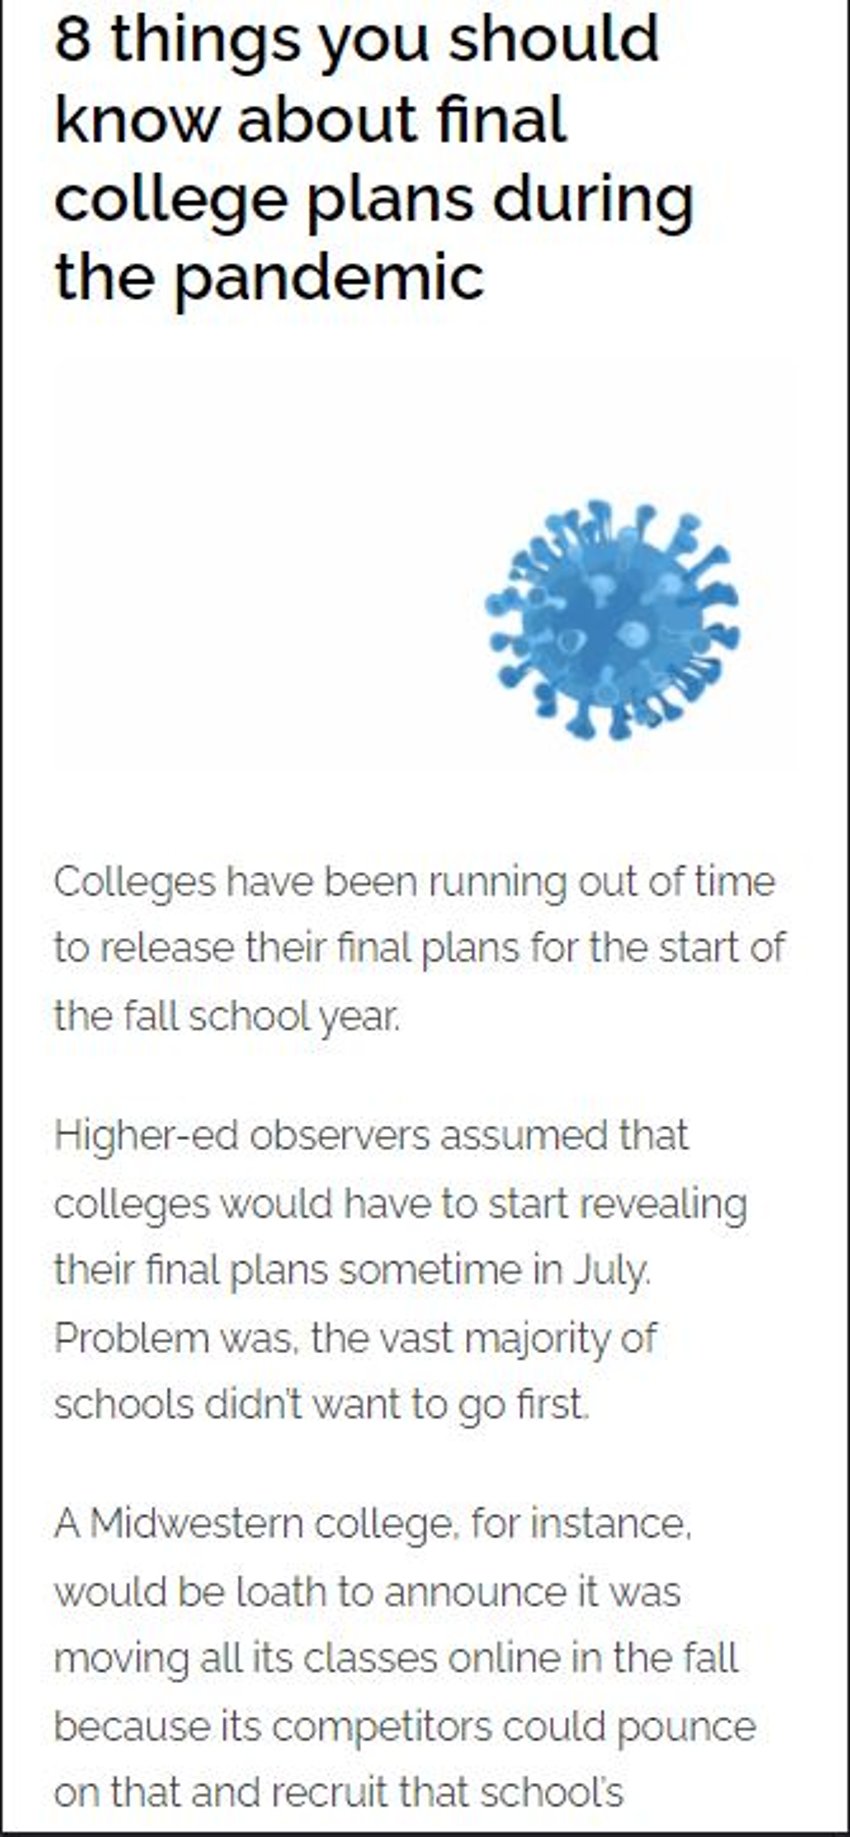 check out the full post [here](https://thecollegesolution.com/8-things-you-should-know-about-final-college-plans-during-the-pandemic/)